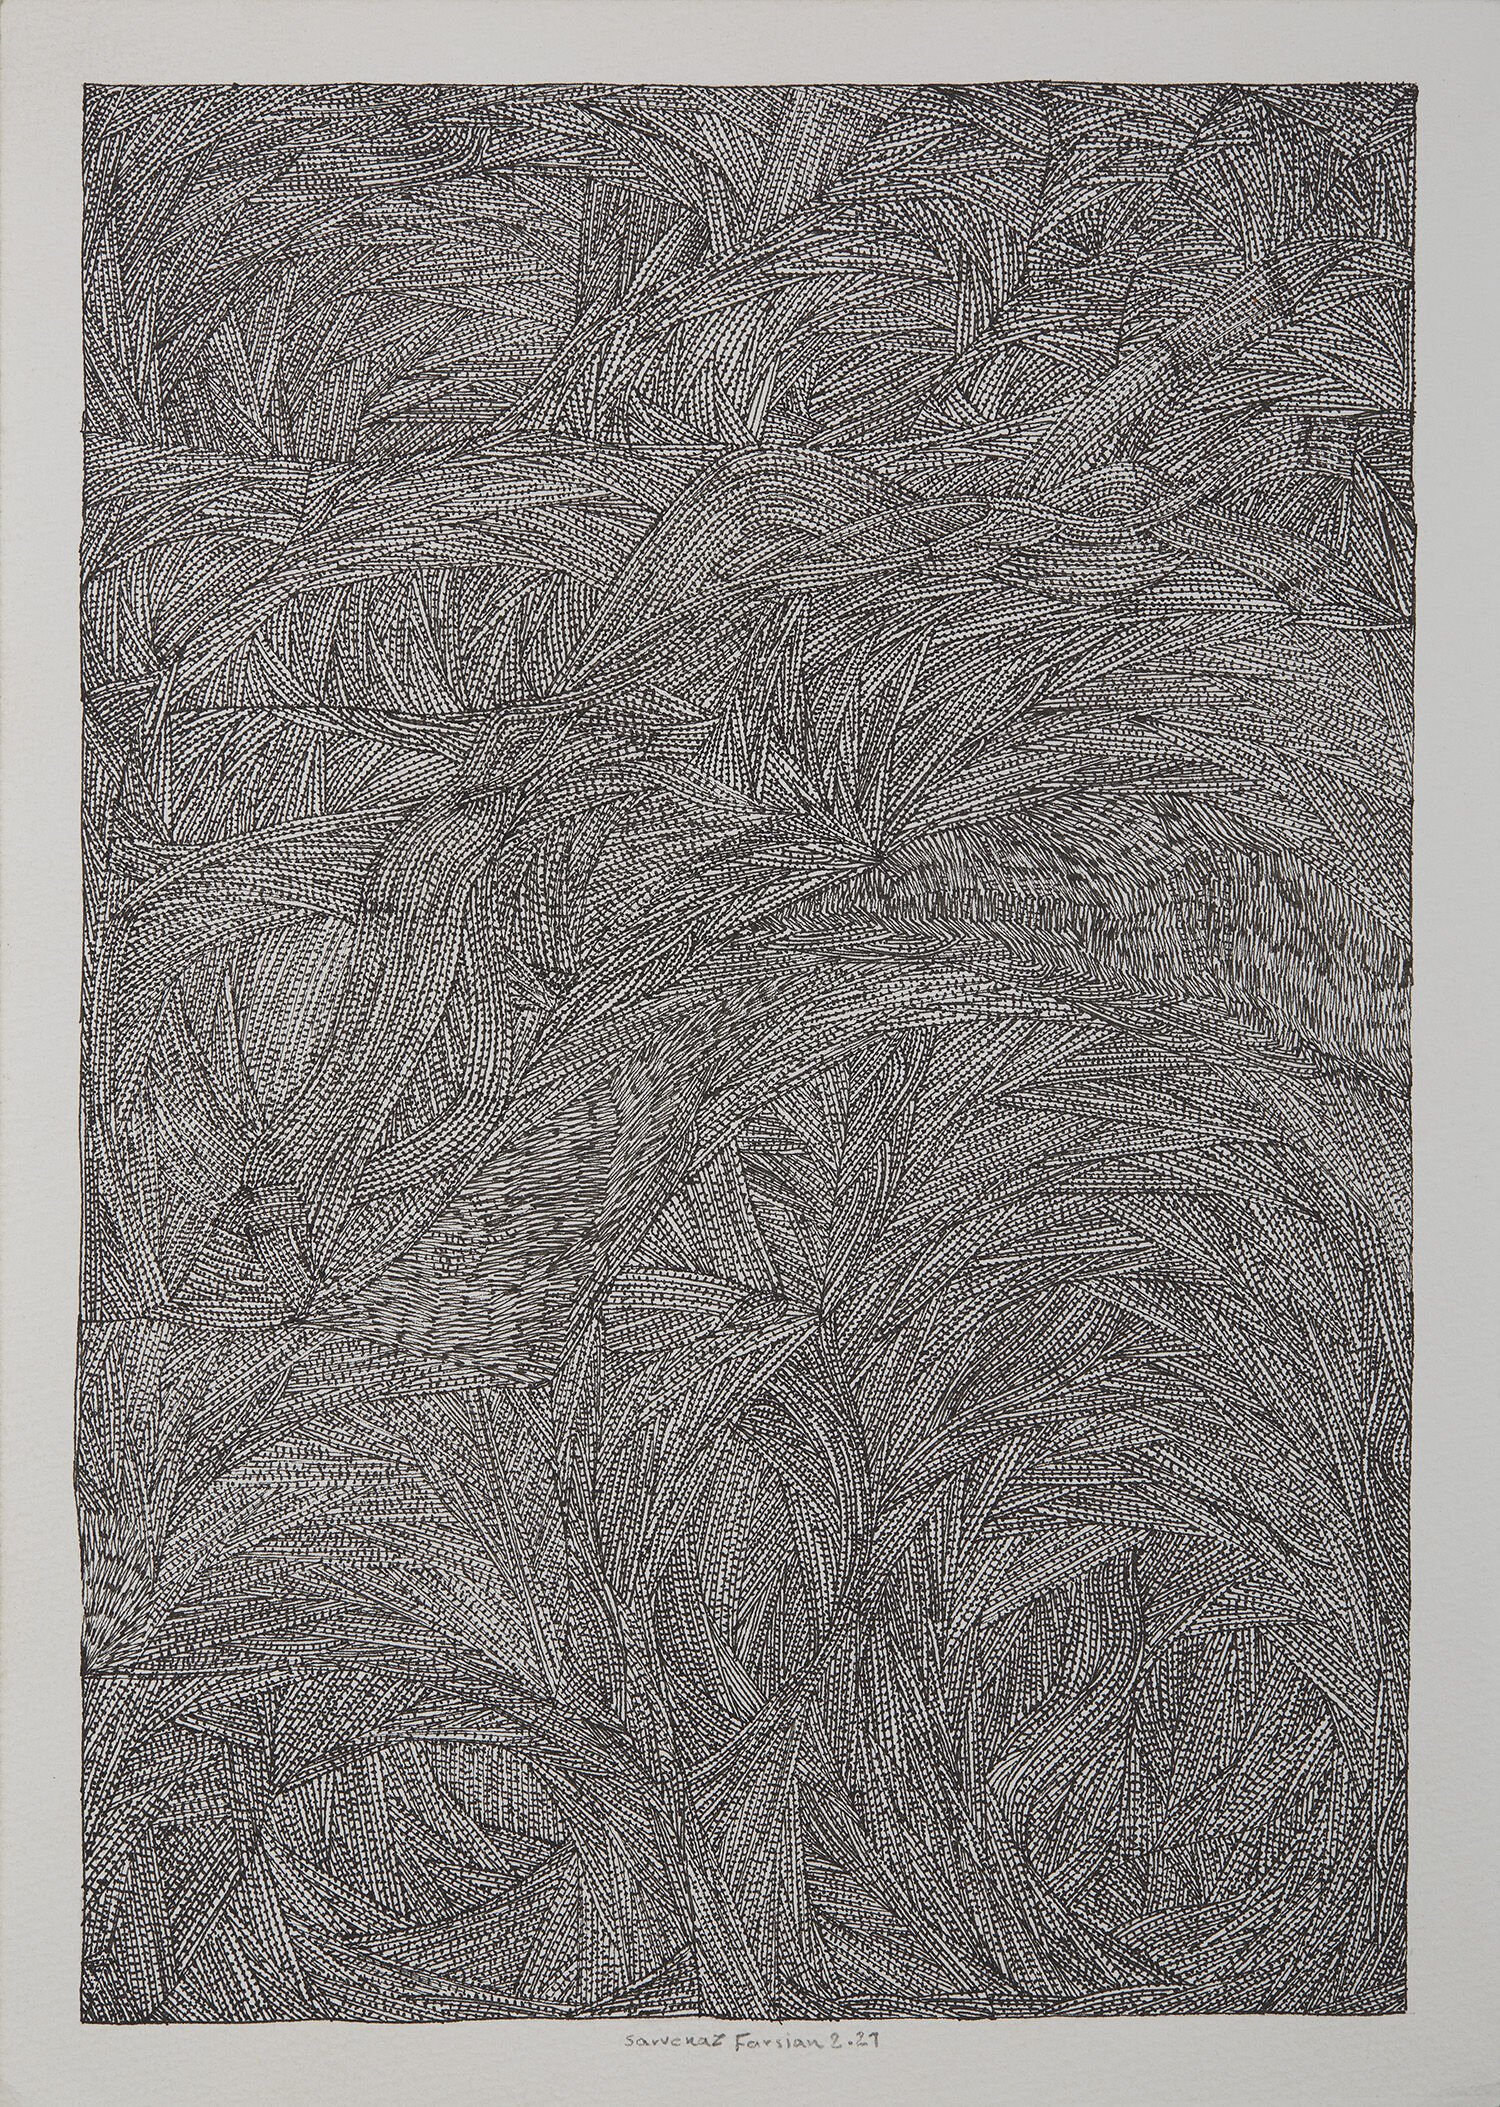   Sarvenaz Farsian  Untitled  , 2021 Ink on paper 10 x 7.25 inches 25.4 x 18.4 cm SvF 23 